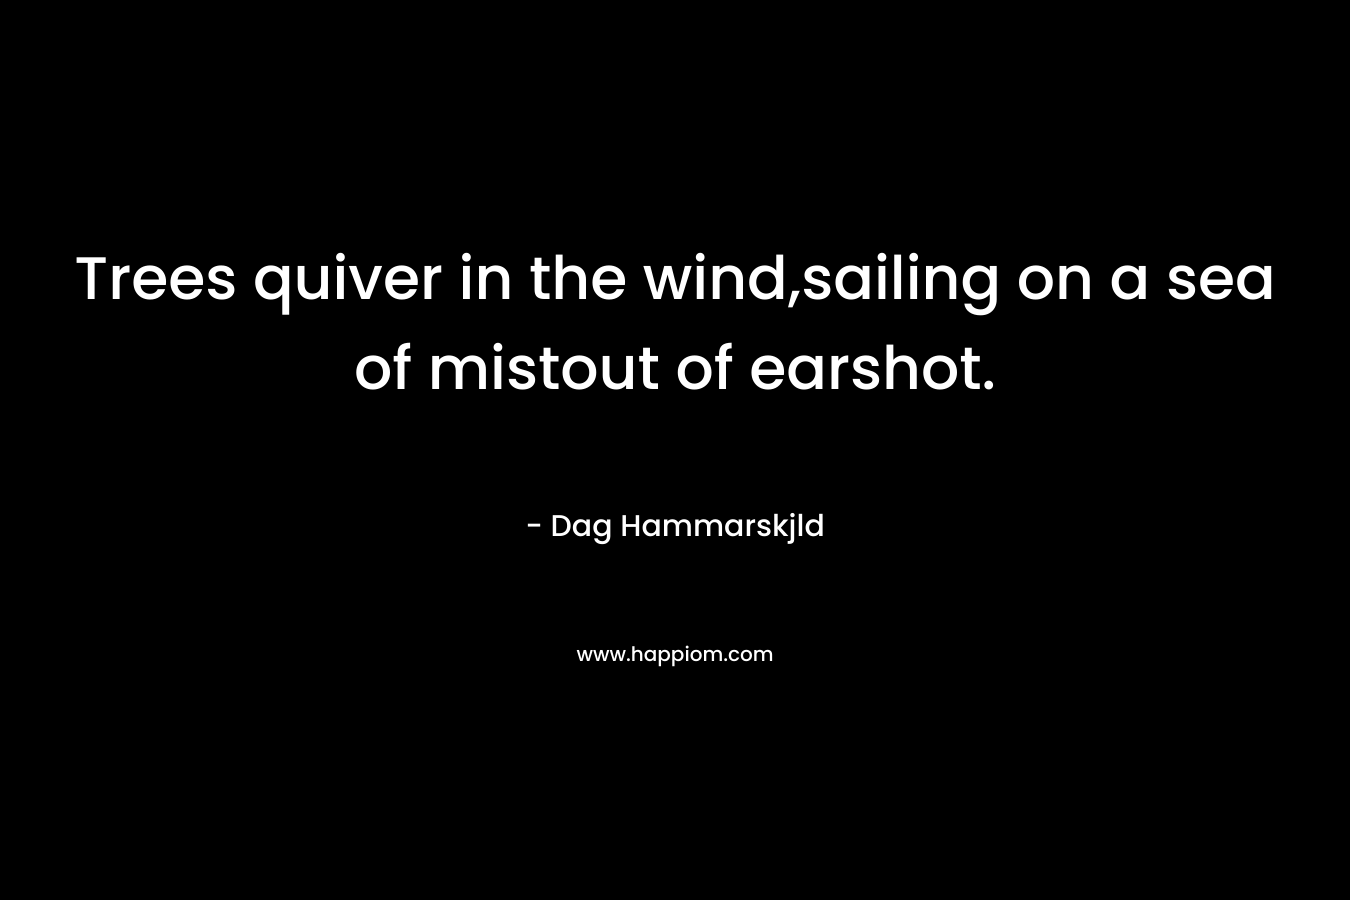 Trees quiver in the wind,sailing on a sea of mistout of earshot. – Dag Hammarskjld